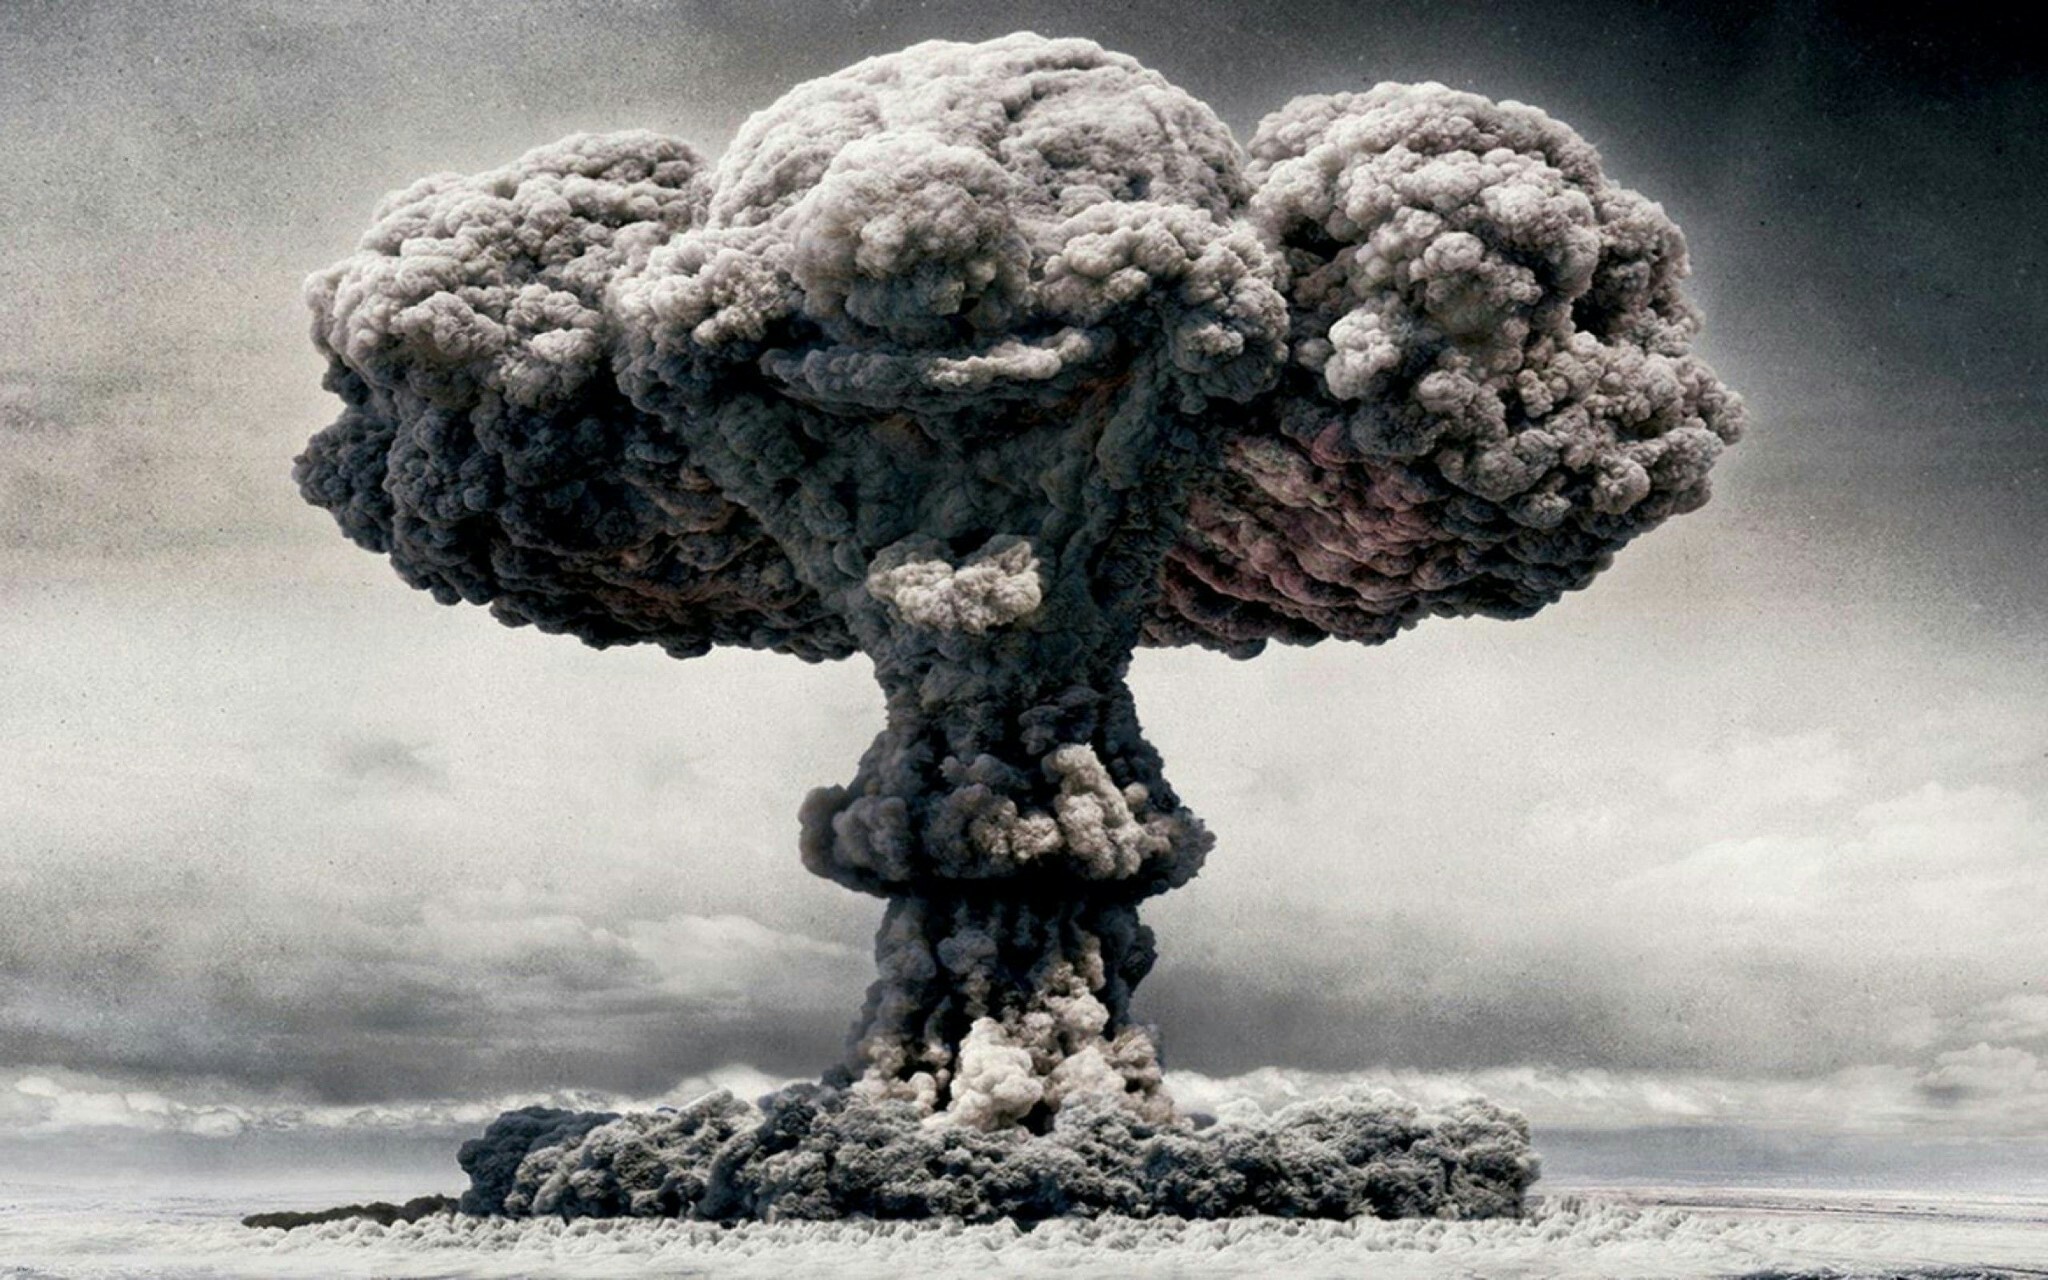 Nuclear bomb wallpaper for mac computers by Corliss Cook